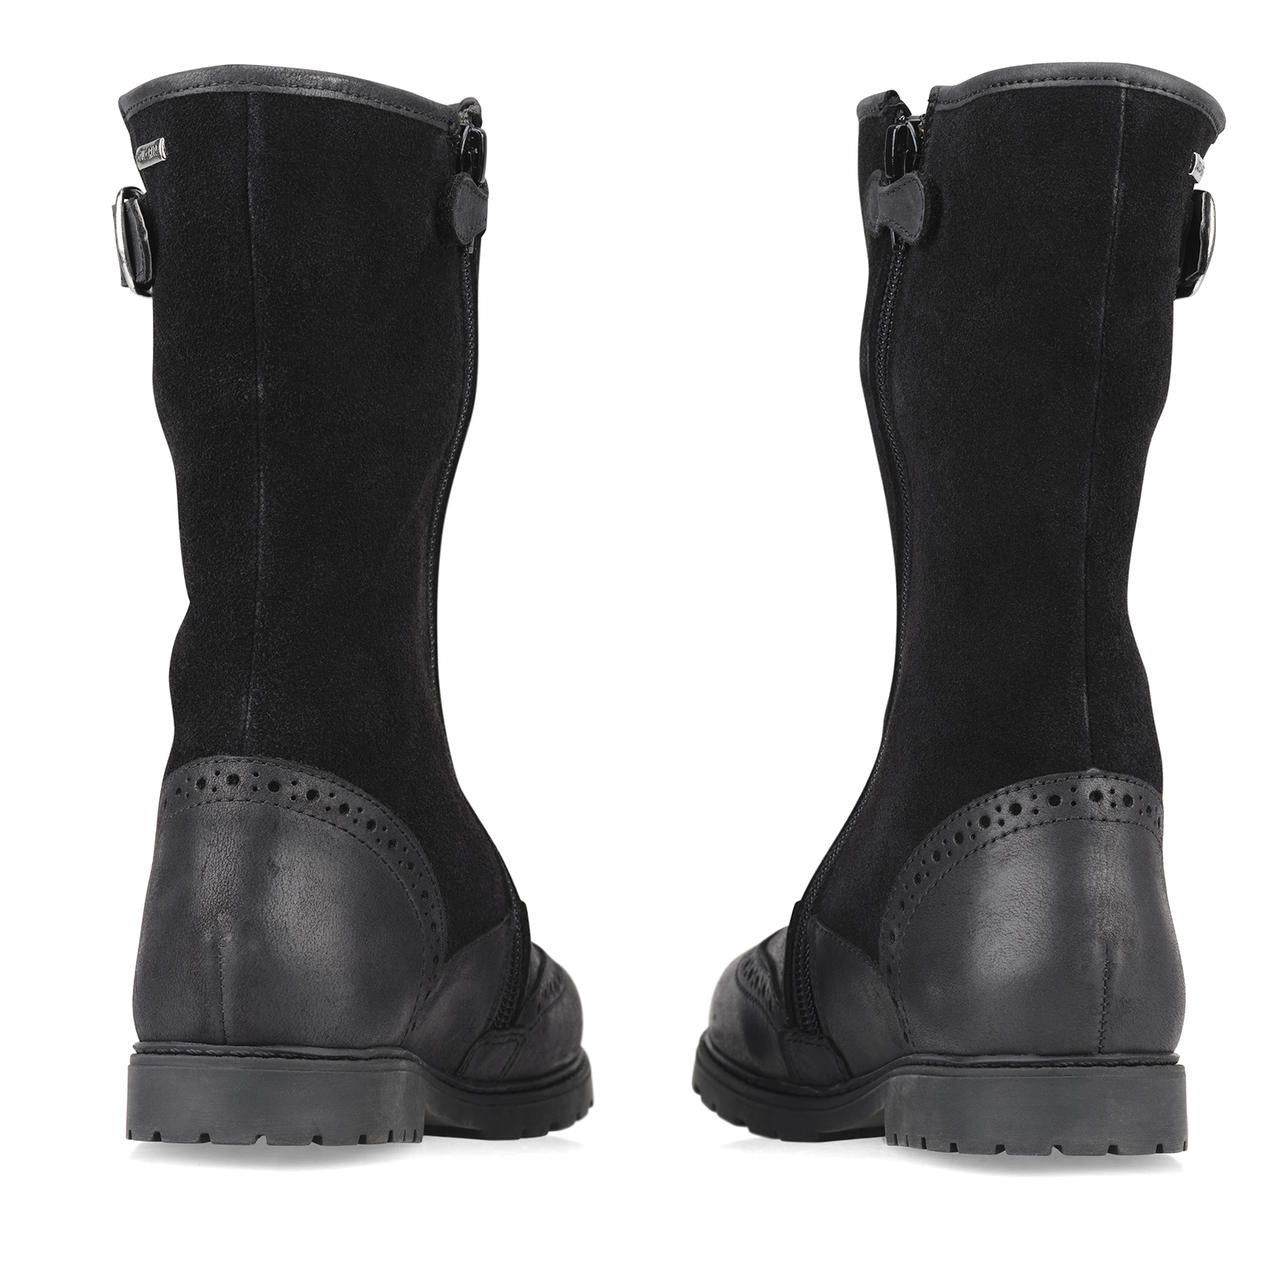 Start-Rite Toasty 1738_7 Girls Black Leather Side Zip Knee High Boots